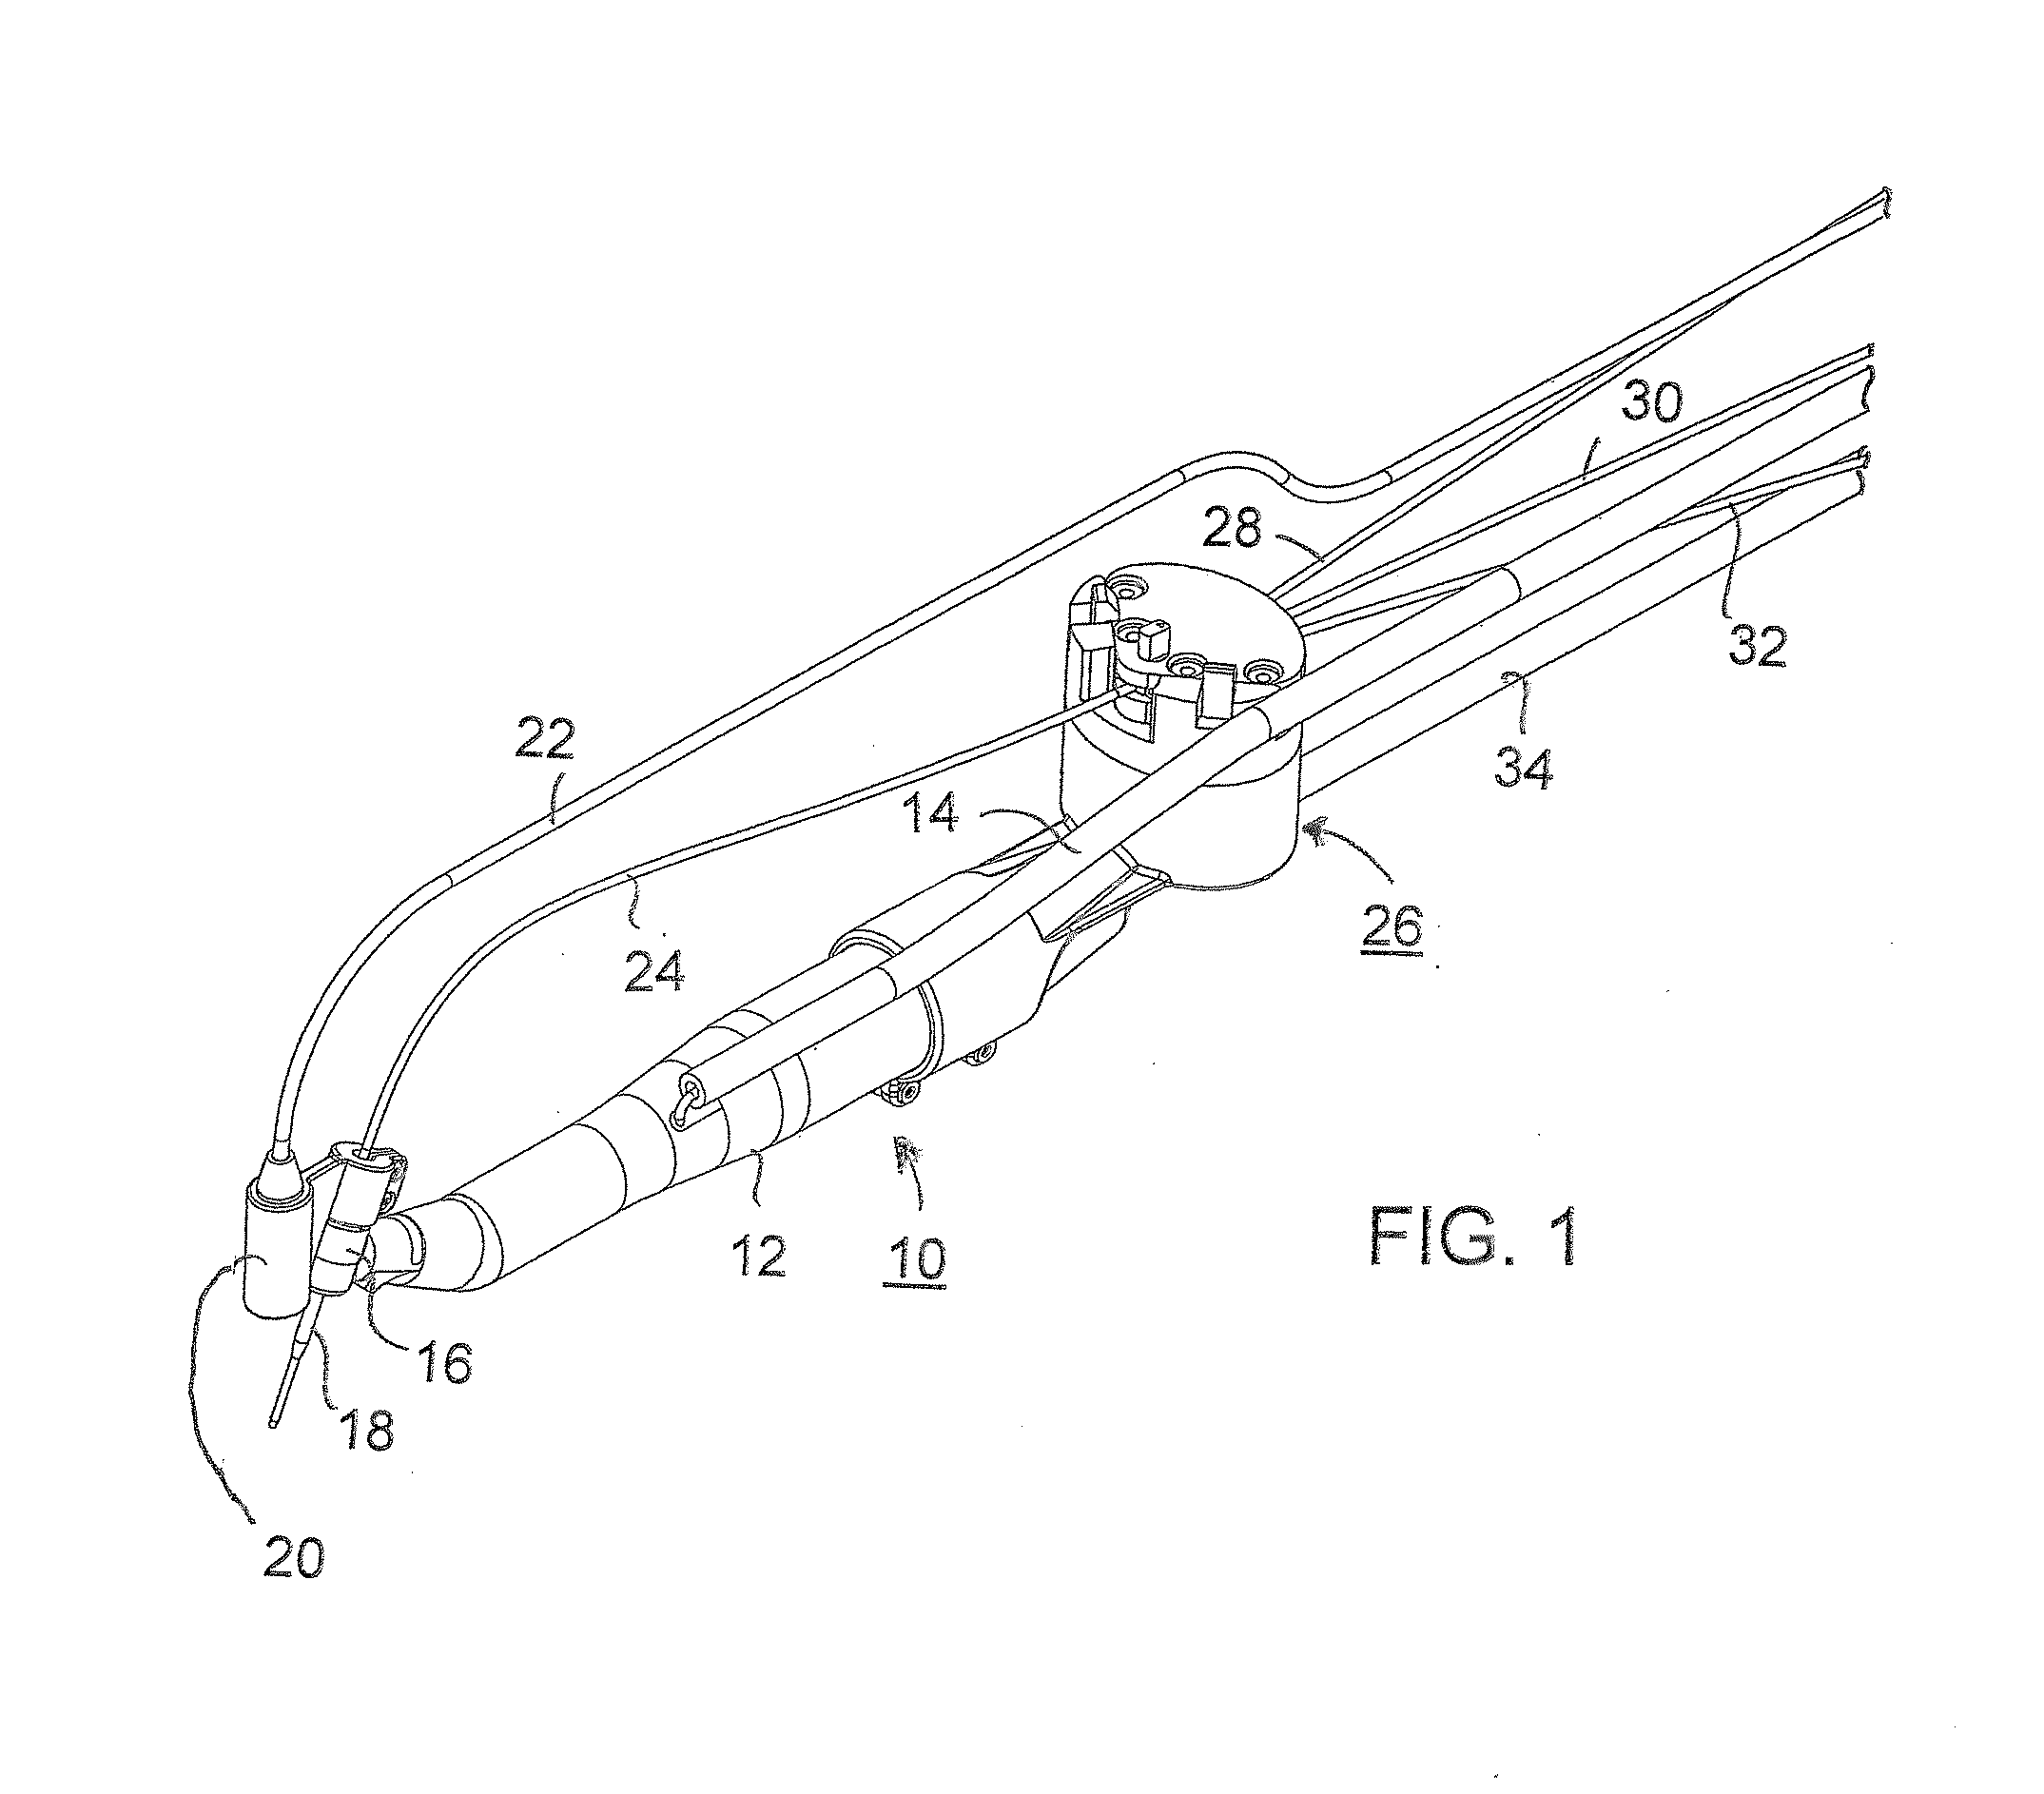 Apparatus for extracting hair follicles for use in transplantation